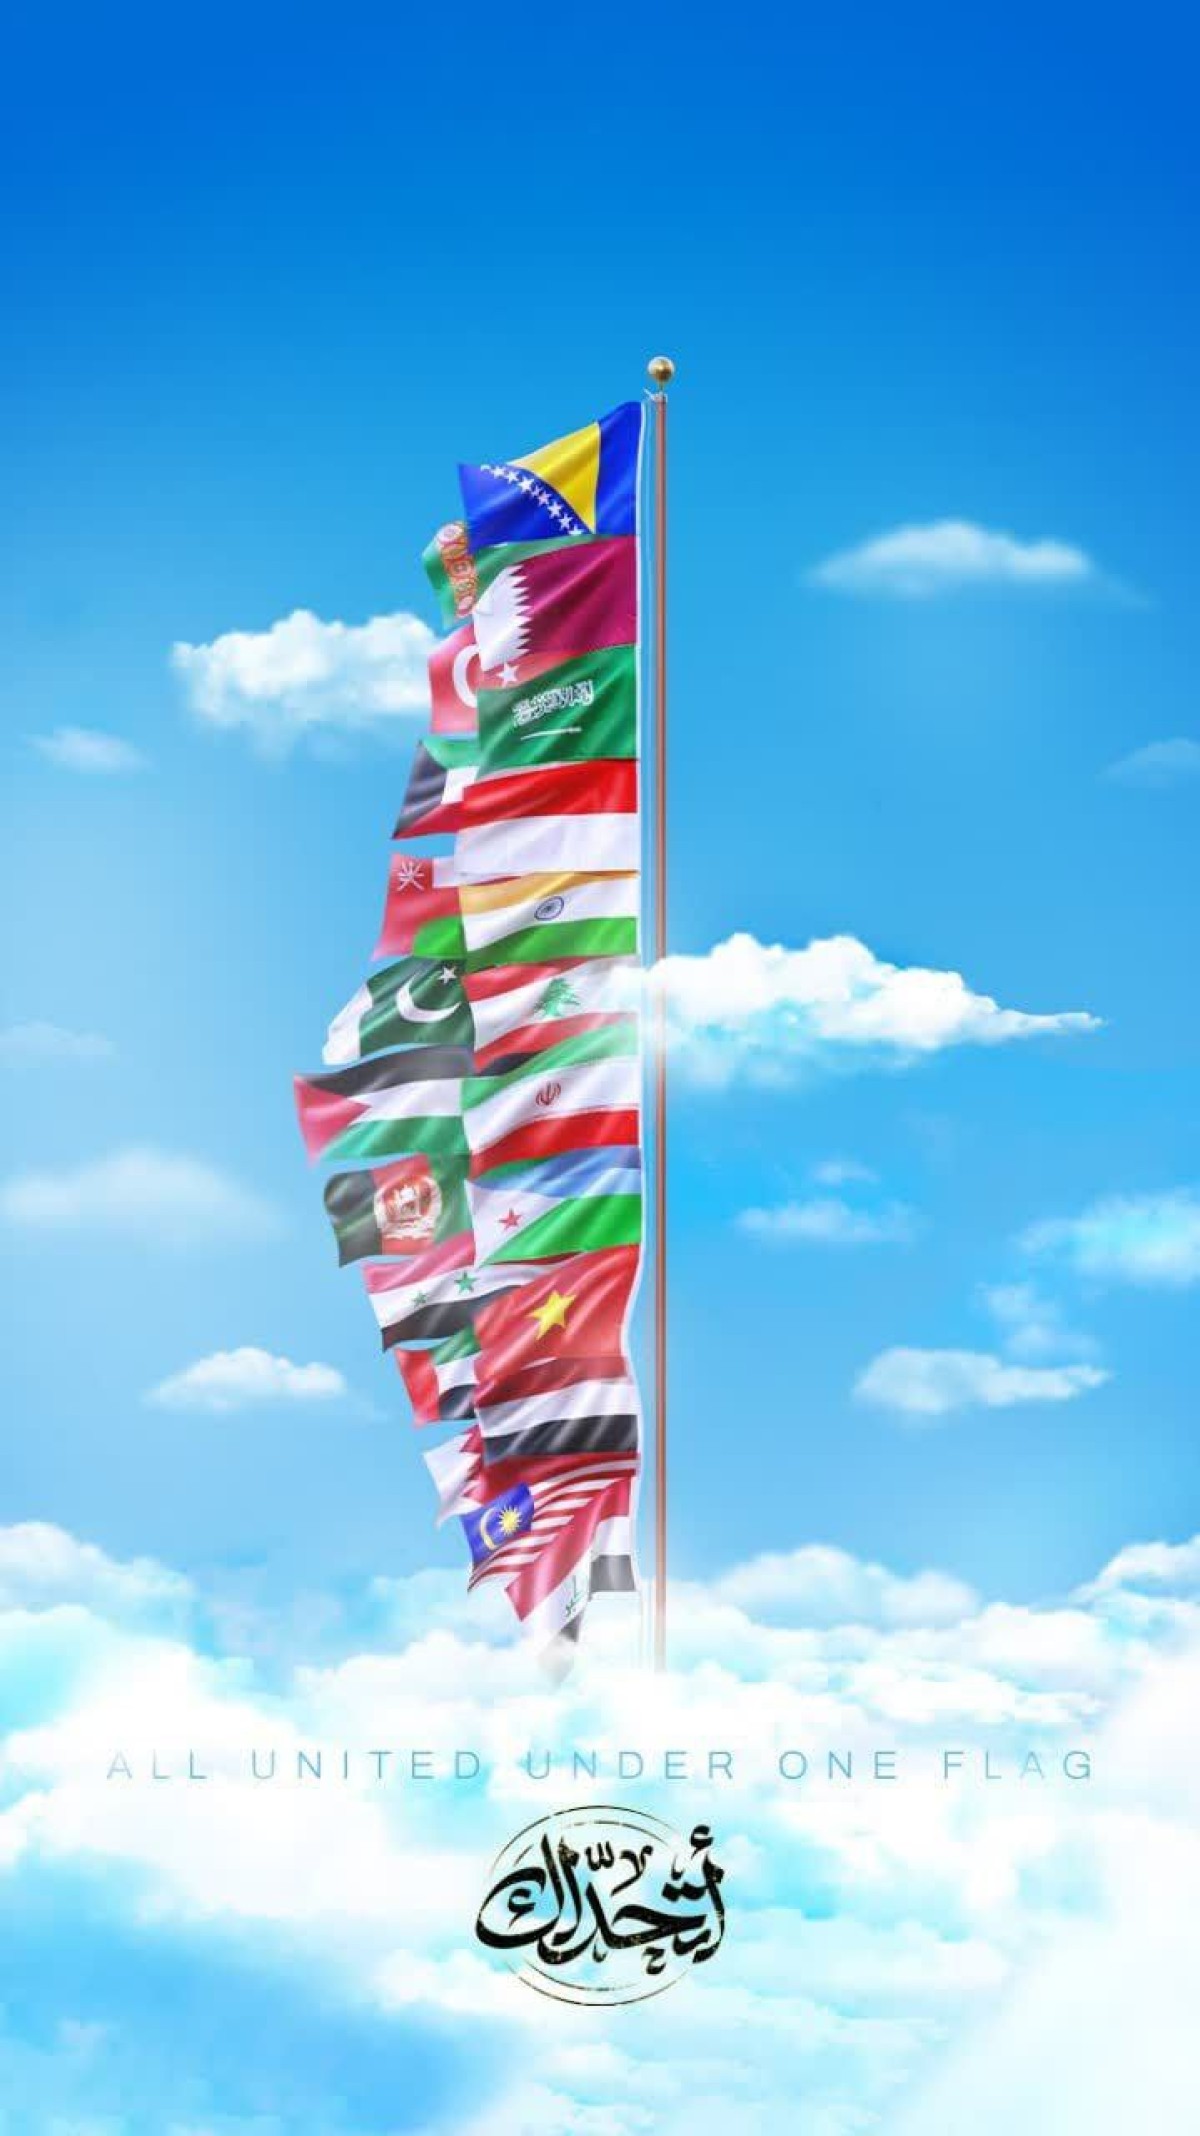 ALL UNITED UNDER ONE FLAG